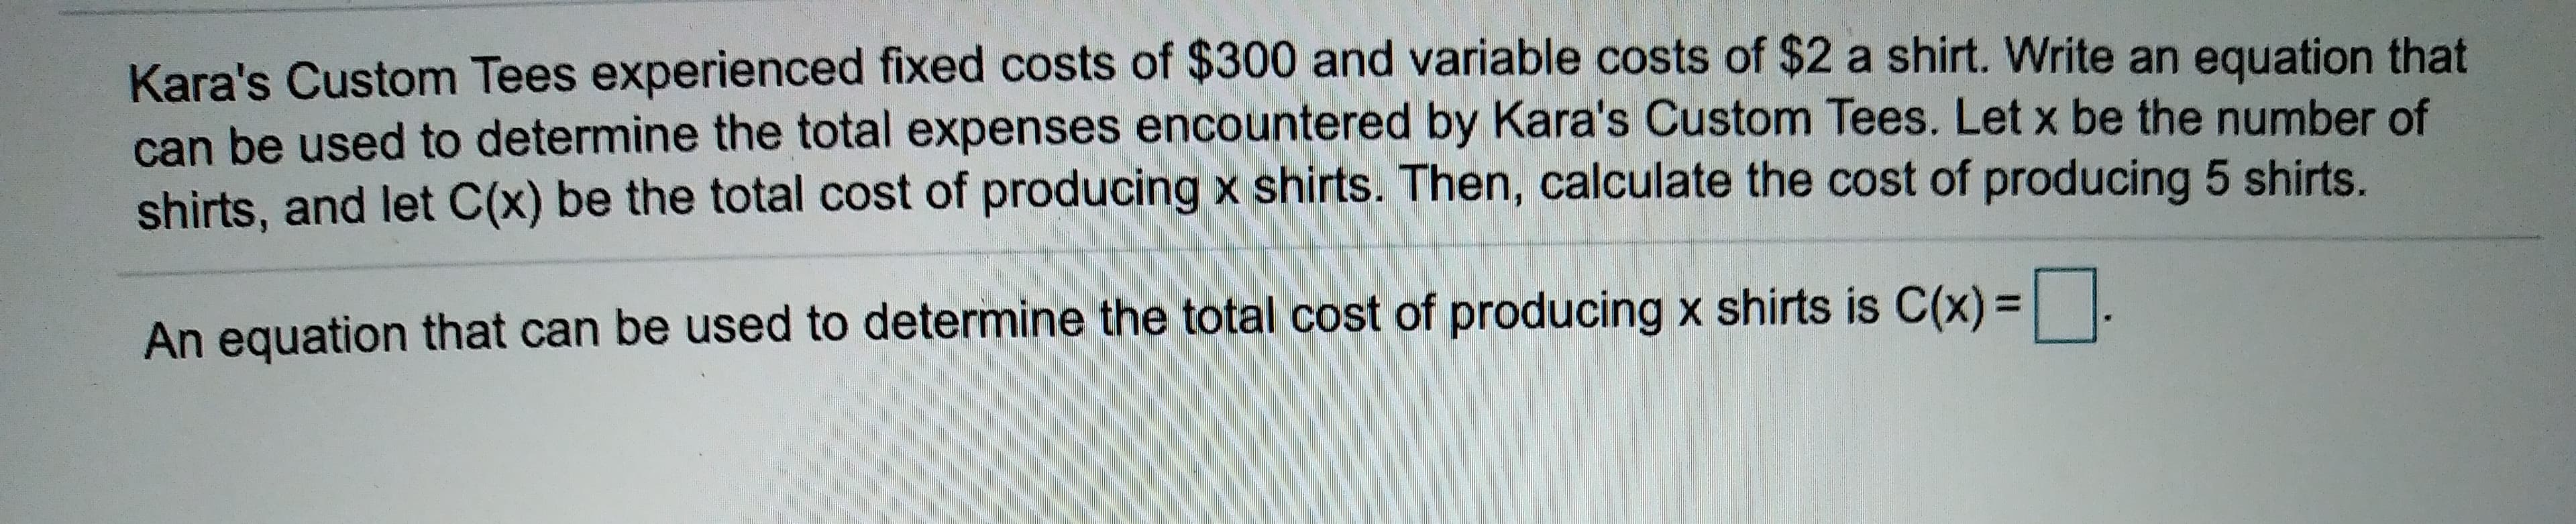 Kara's Custom Tees experienced fixed costs of $300 and variable costs of $2 a shirt. Write an equation that
can be used to determine the total expenses encountered by Kara's Custom Tees. Let x be the number of
shirts, and let C(x) be the total cost of producing x shirts. Then, calculate the cost of producing 5 shirts.
An equation that can be used to determine the total cost of producing x shirts is C(x) .
